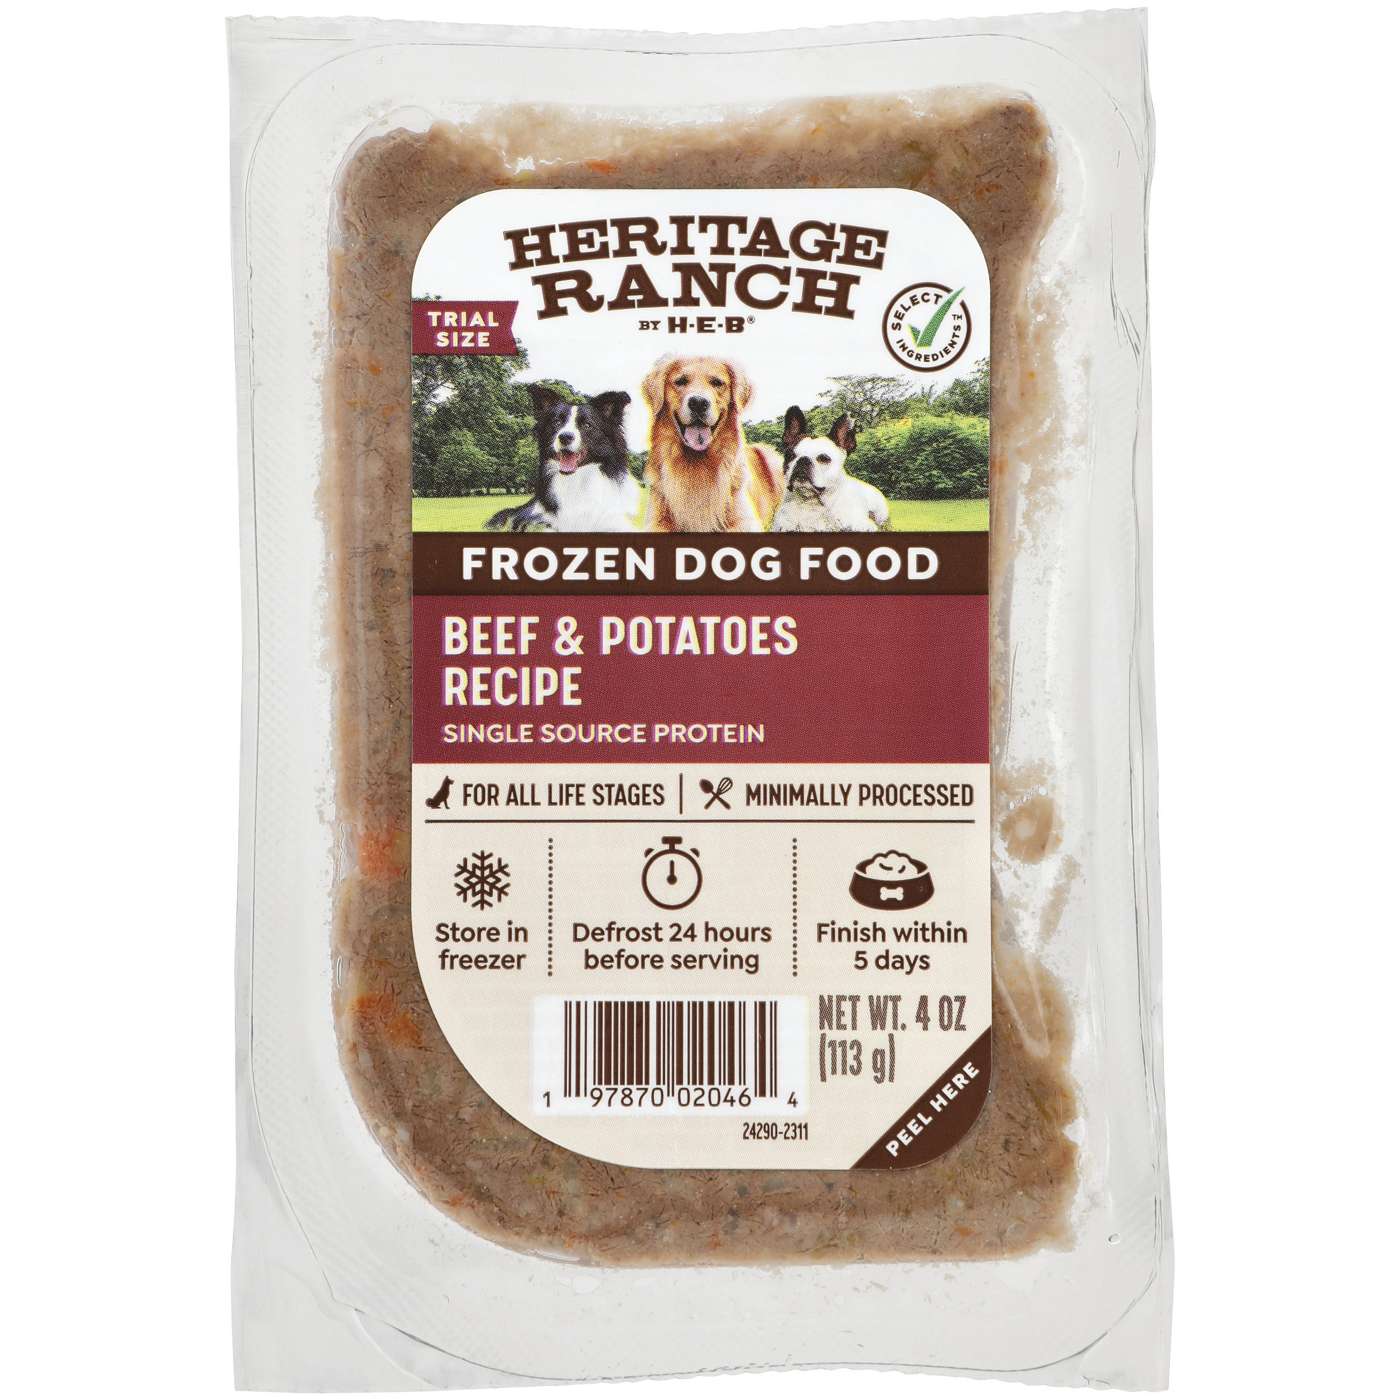 Heritage Ranch by H-E-B Frozen Dog Food, Trial Size – Beef & Potatoes; image 1 of 7